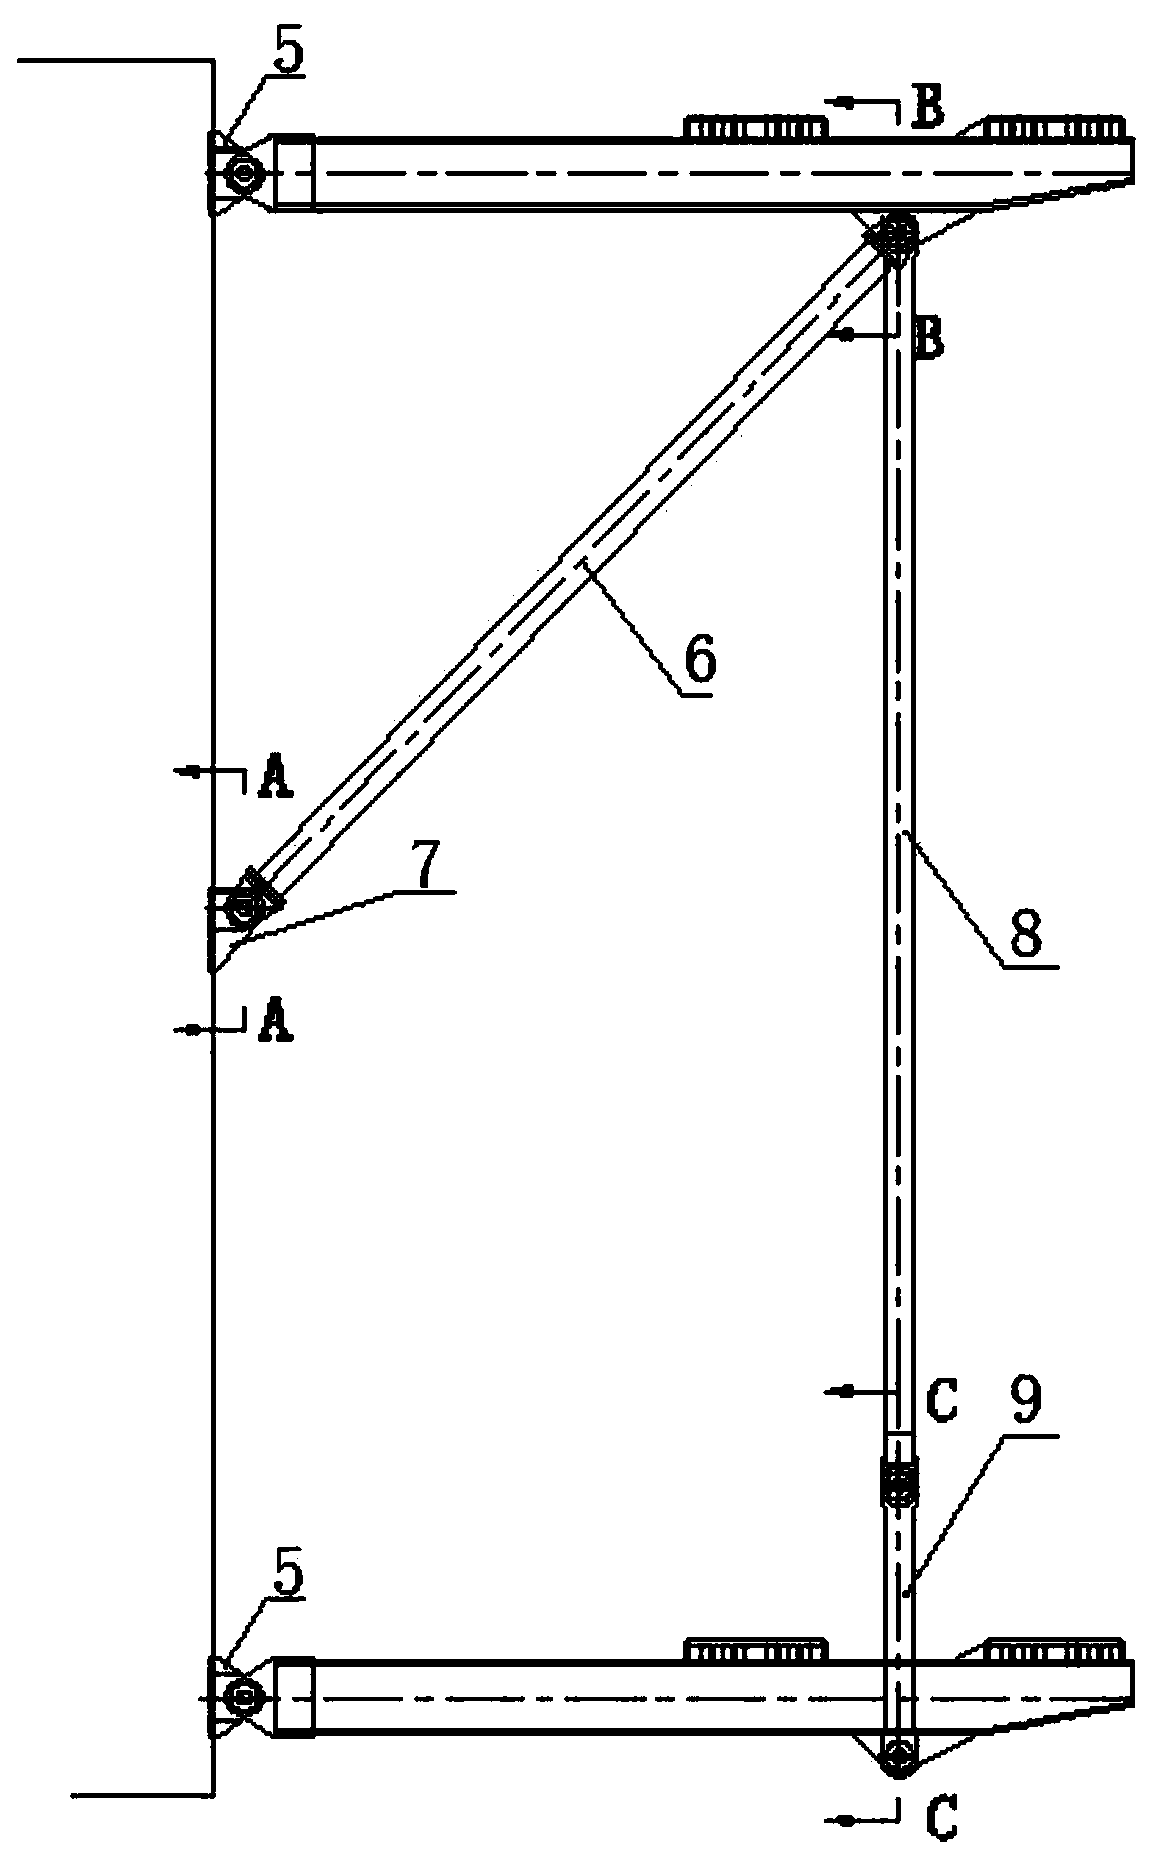 Supporting system of asymmetrical frame tandem externally suspended climbing tower crane